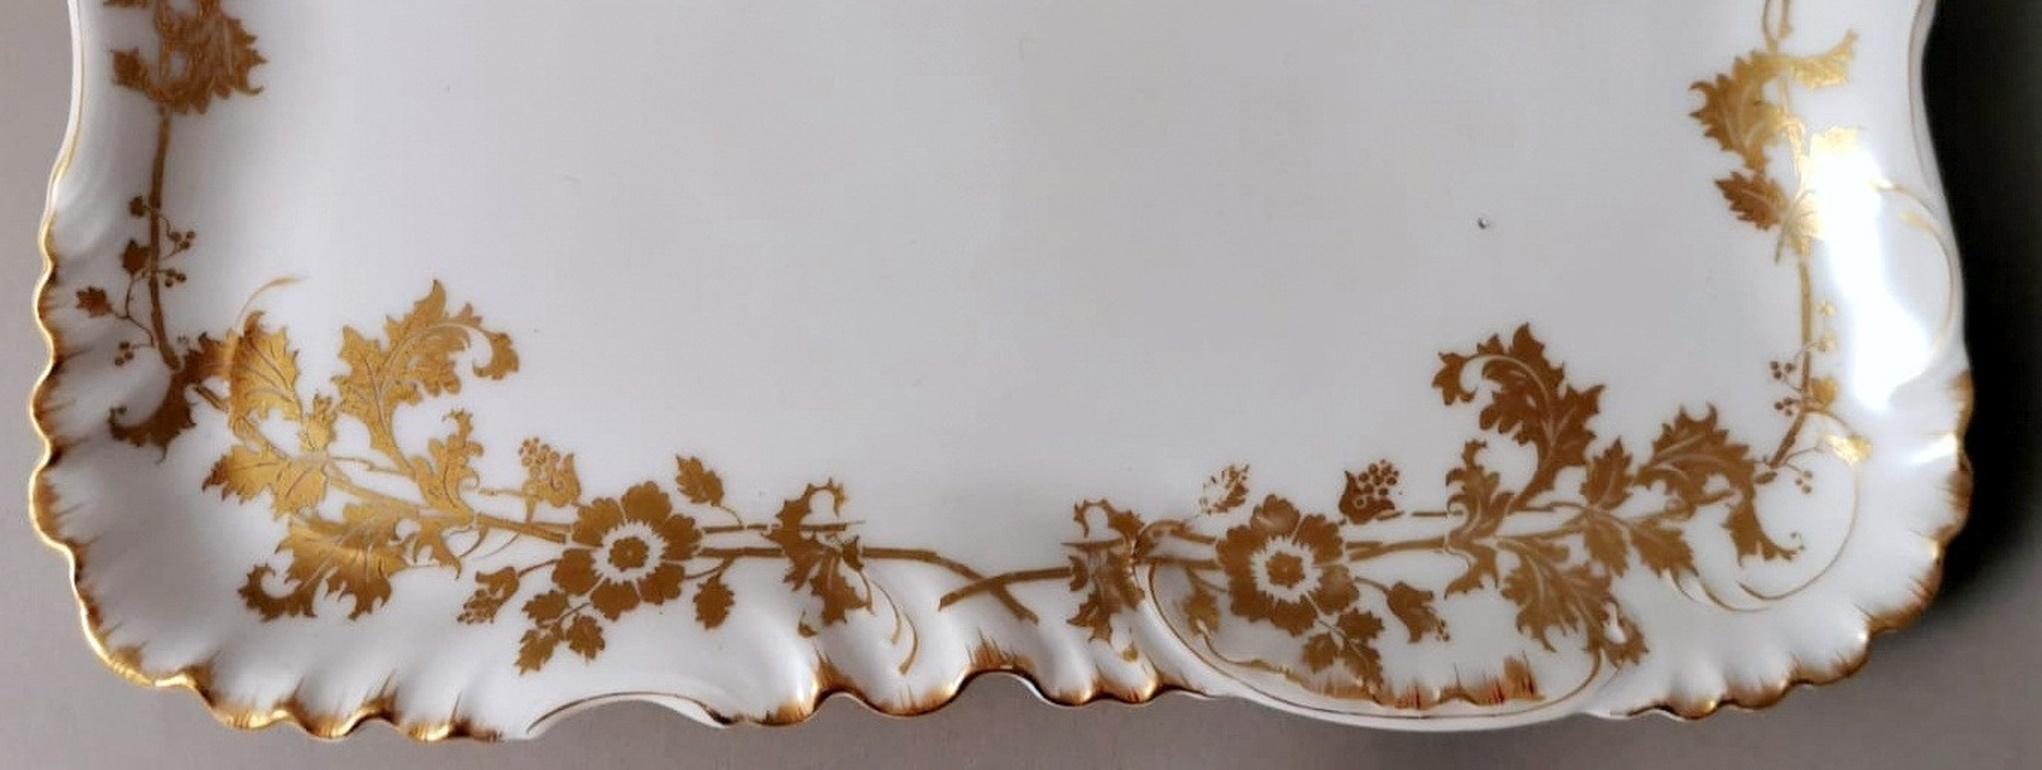 Haviland Limoges II° Pair of French Trays White Porcelain and Gold Decoration For Sale 6